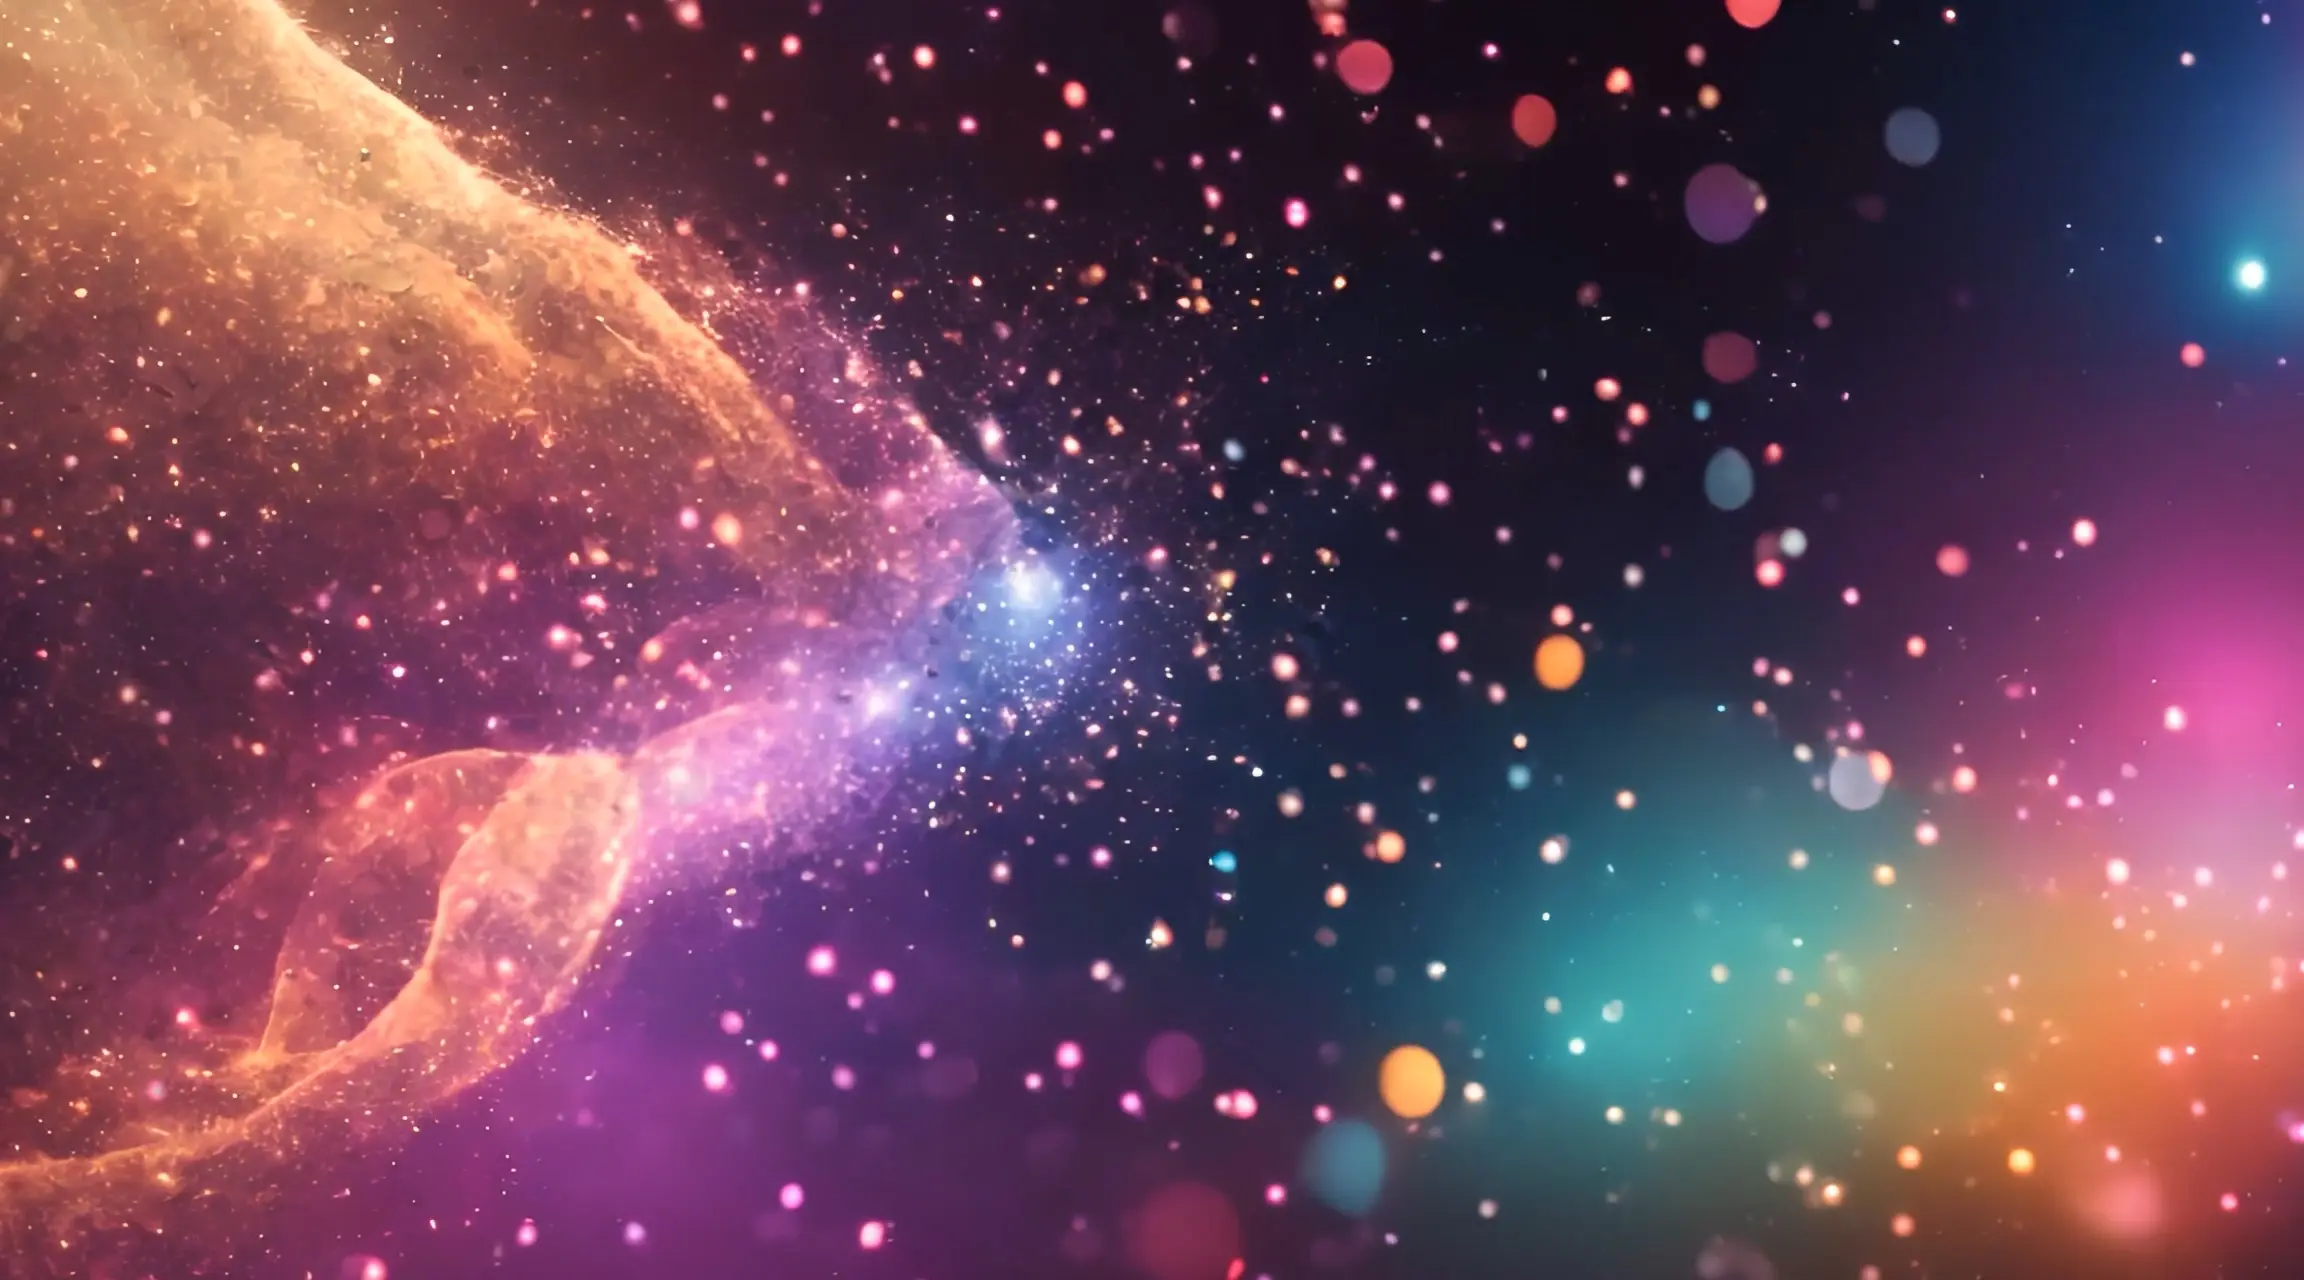 Nebula Dust Dance Colorful Space Particles